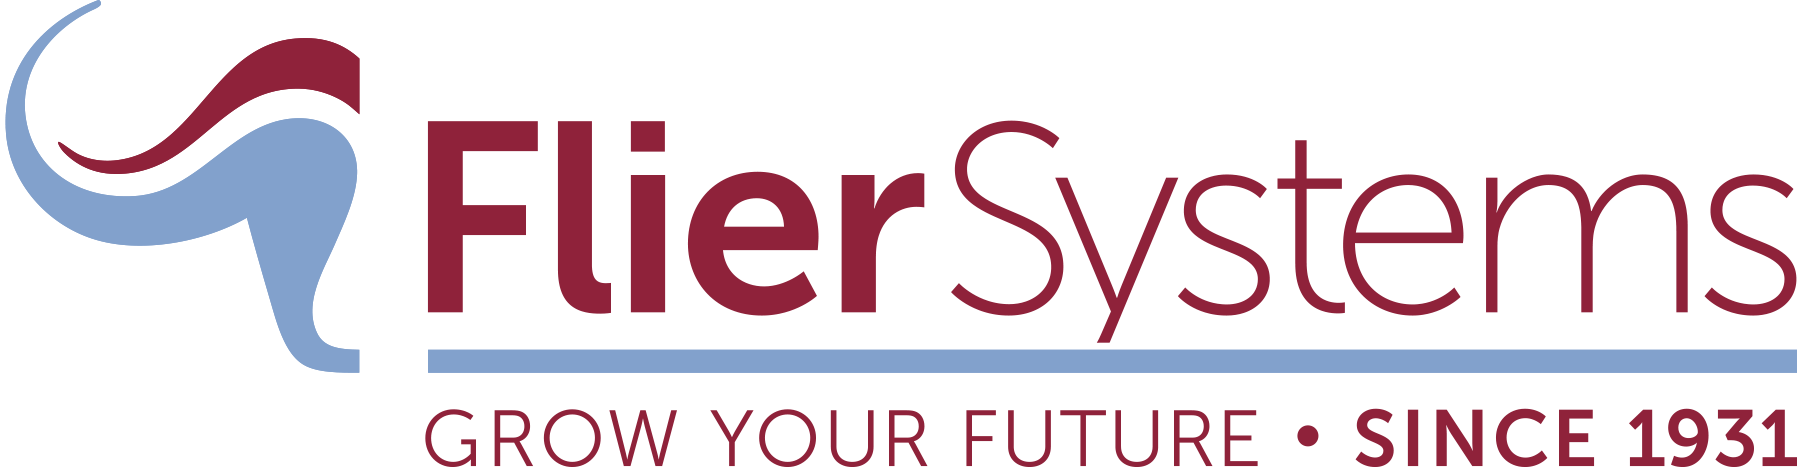 Flier Systems Logo (Transparant).png